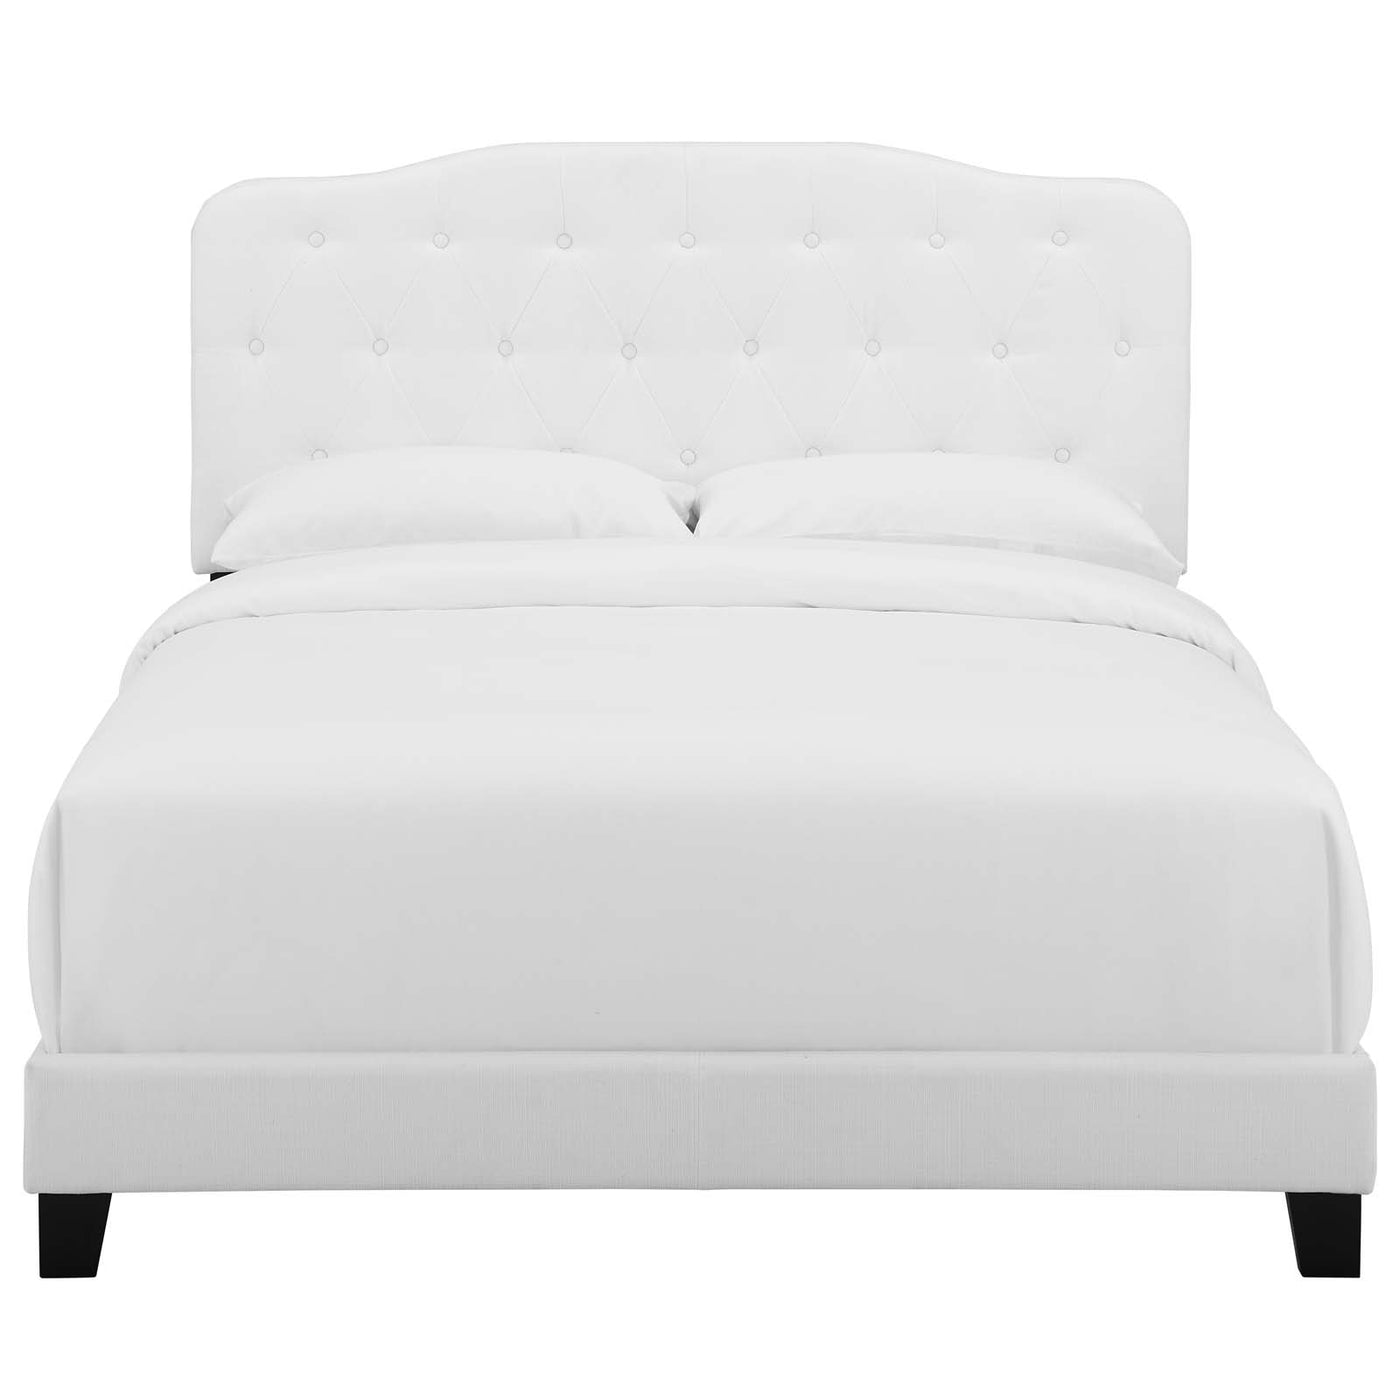 Amelia Queen Upholstered Fabric Bed